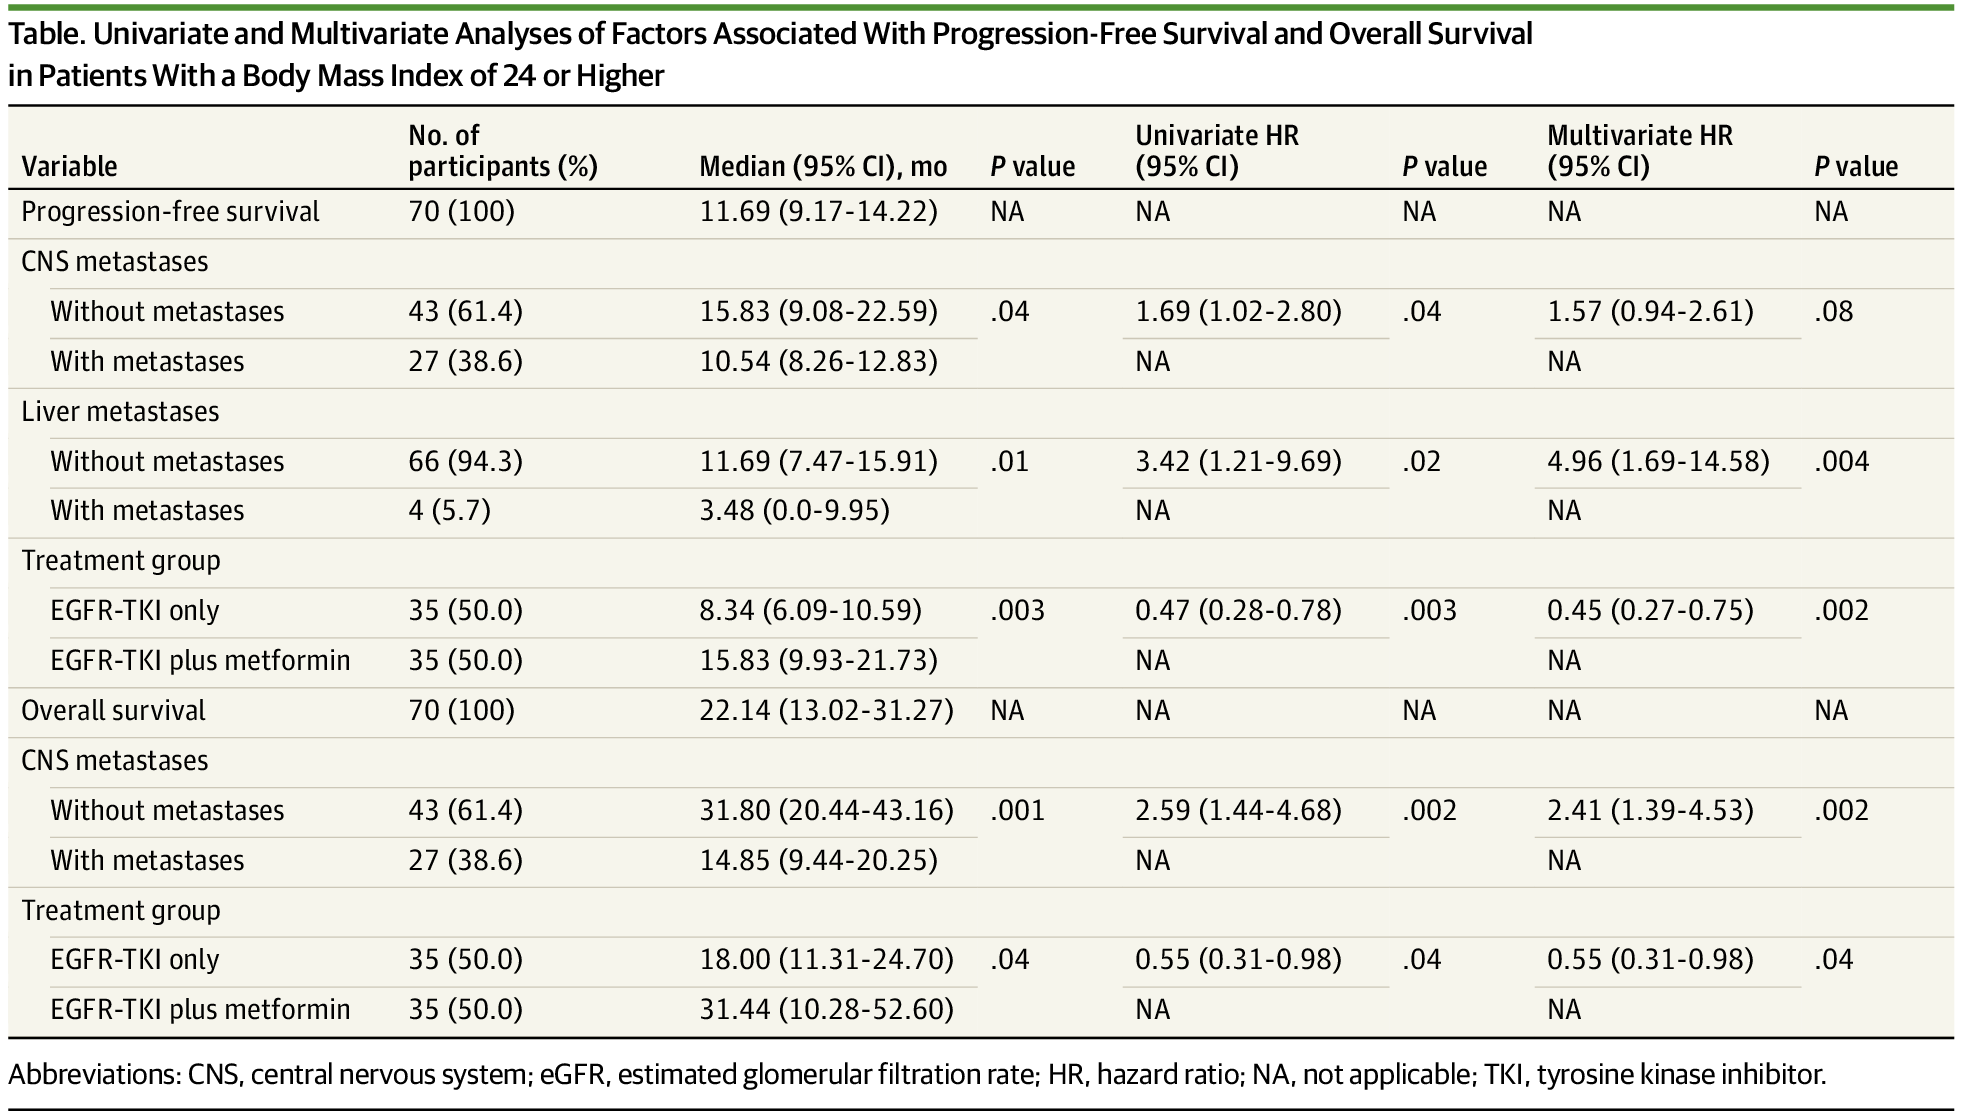 Association of BMI With Metformin Plus EGFR–TKI Benefit in Patients With Lung Adenocarcinoma